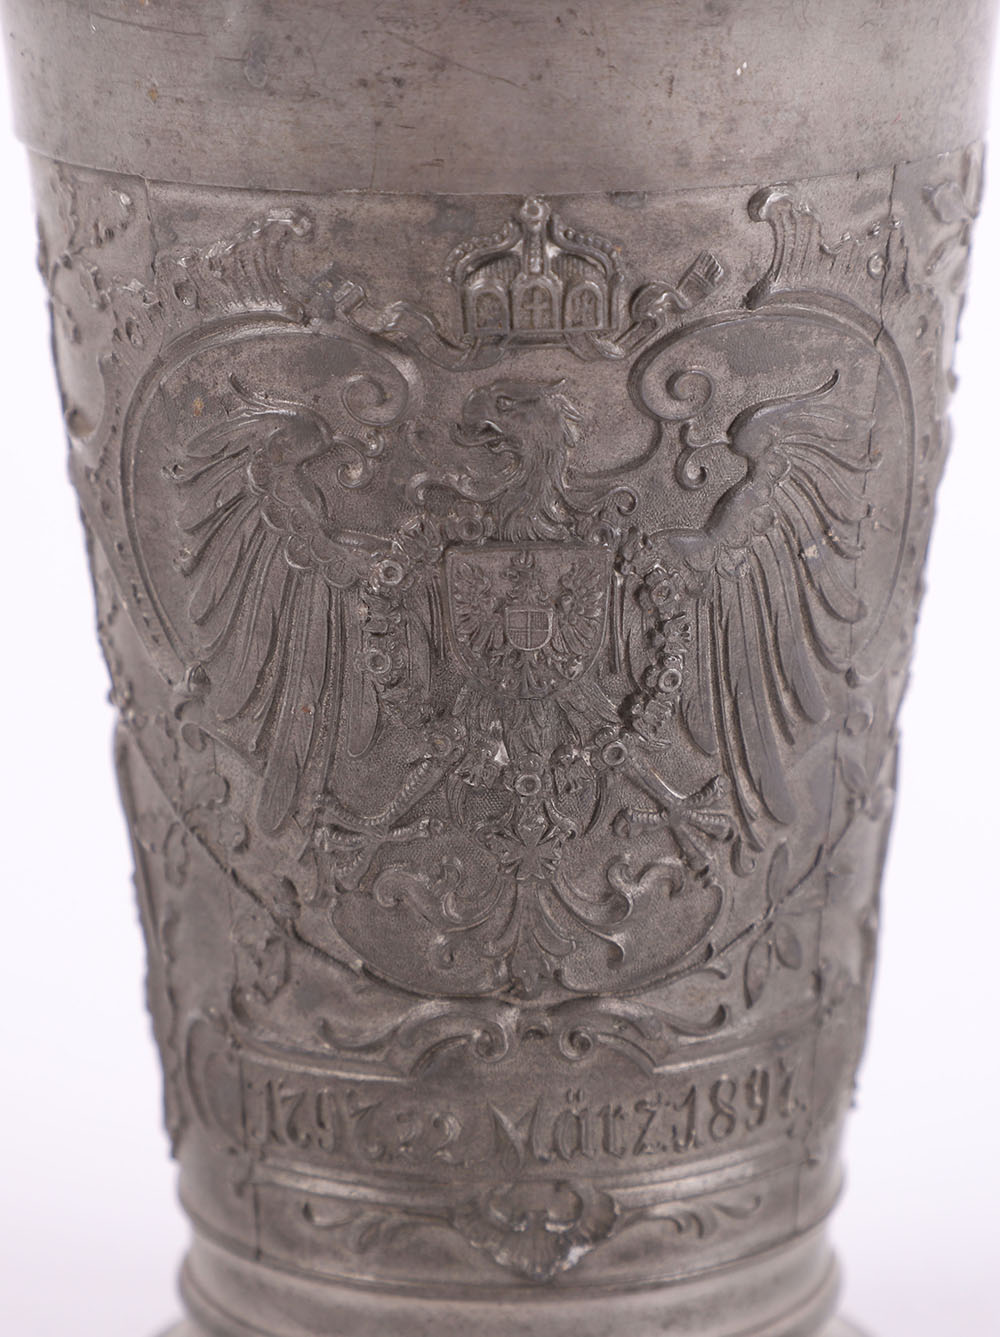 Pewter Beaker to Commemorate the Centenary of the Prussian Kaiser 1797-1897 - Image 5 of 6